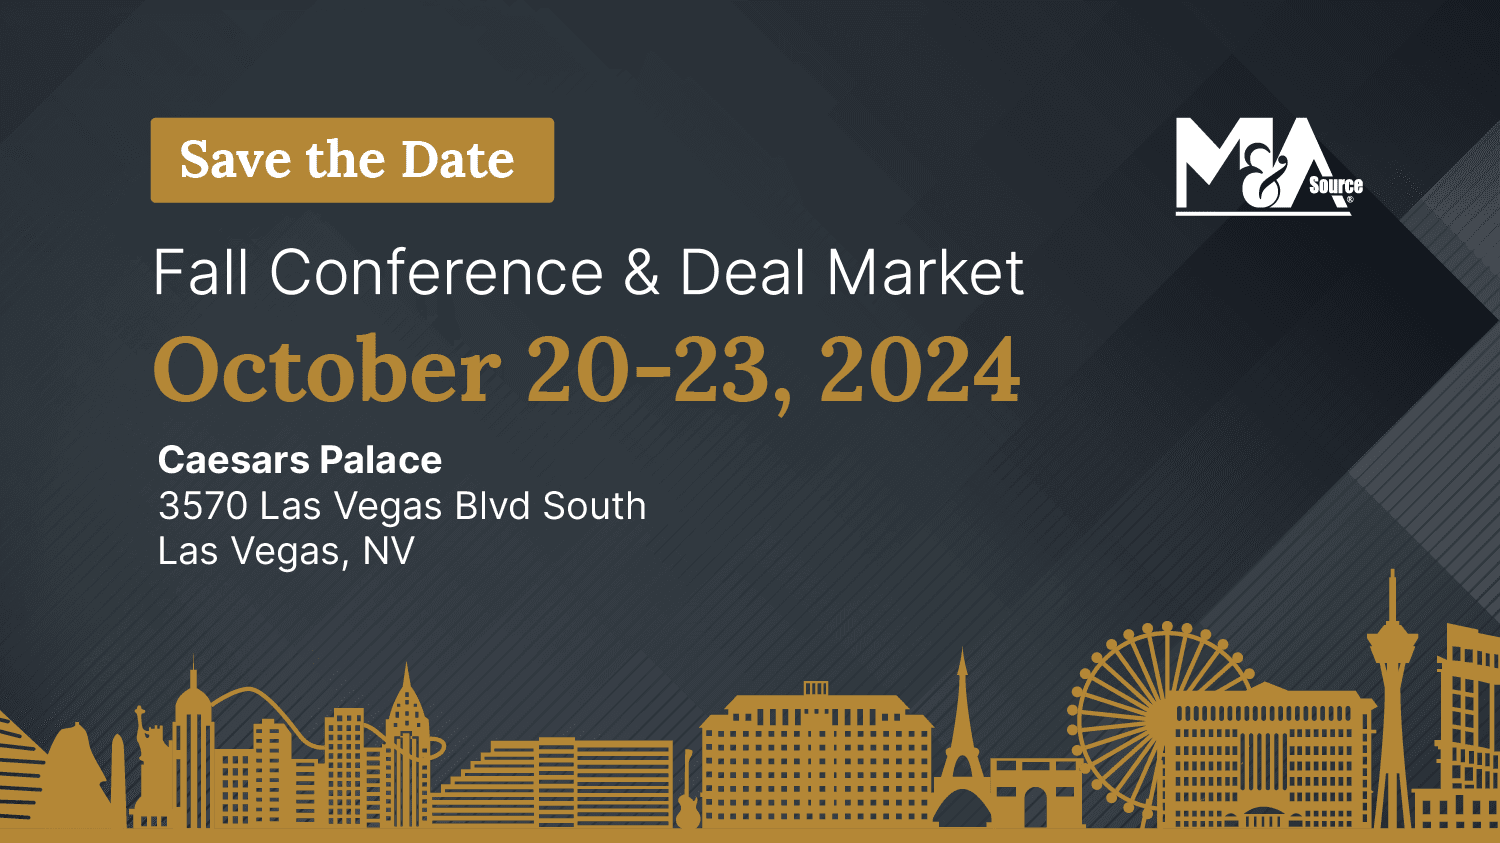 Save the Date 2024 Fall Conference & Deal Market M&A Source